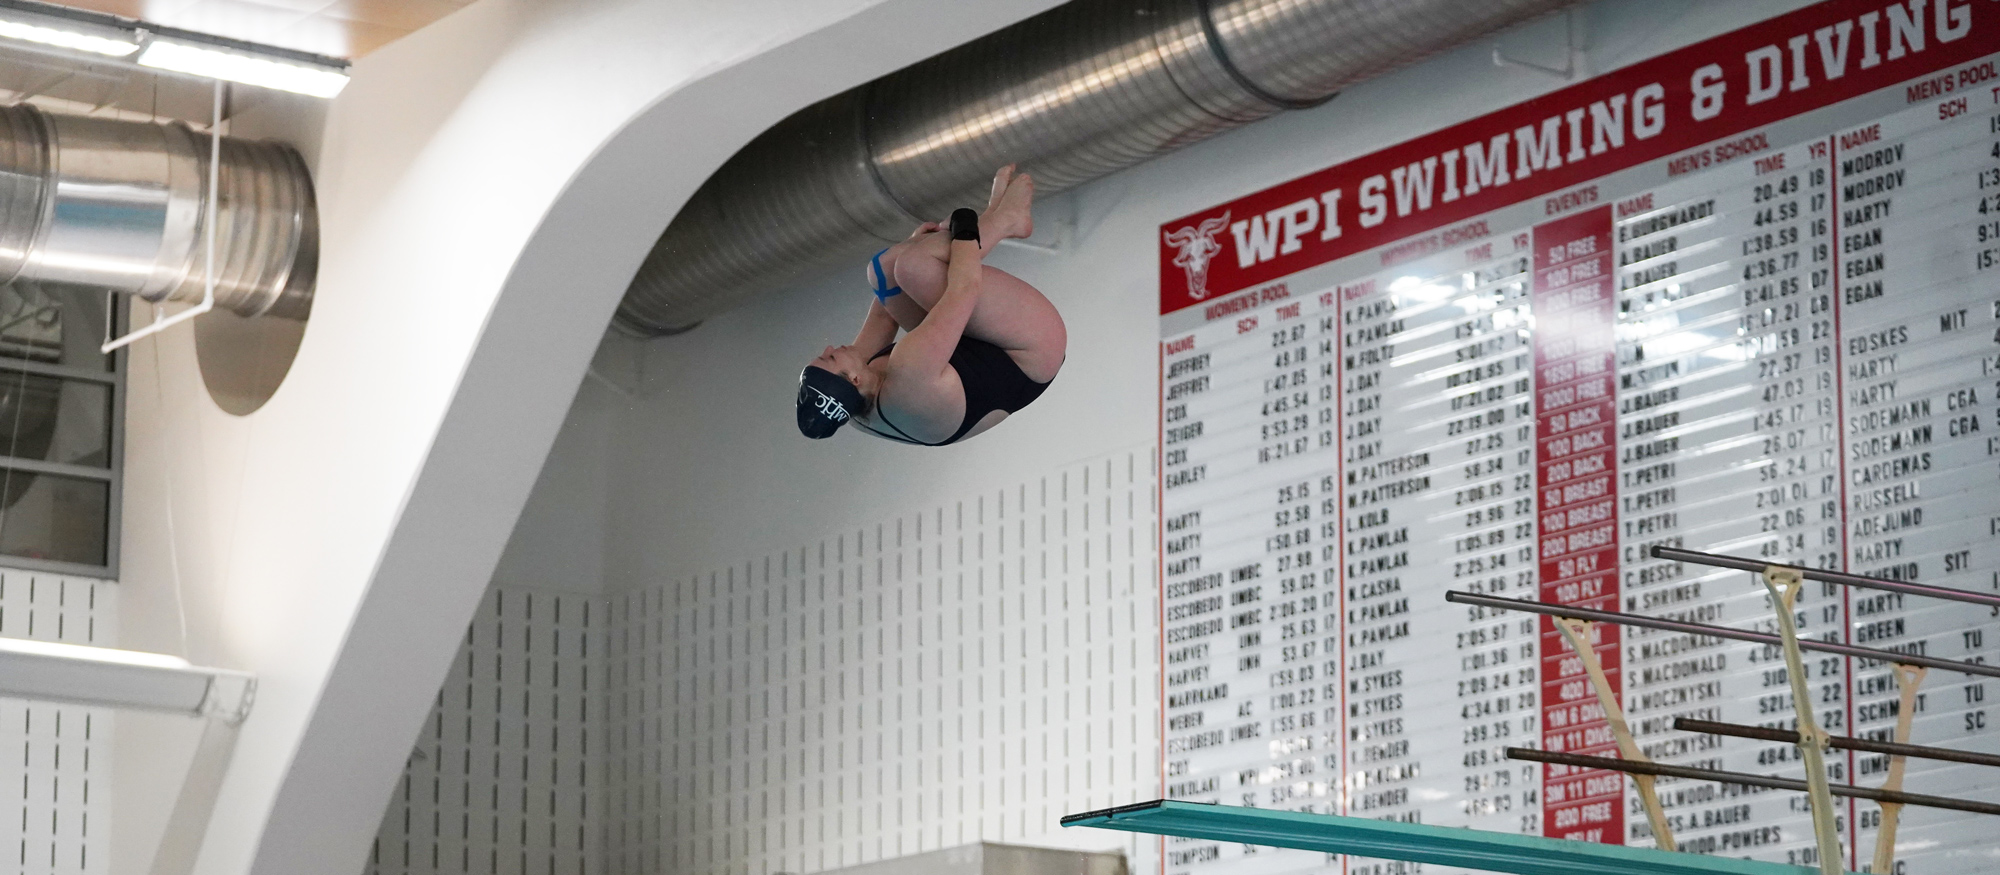 Maddy Sewell dives off the 3-meter board en route to second place at the NEWMAC Swimming and Diving Championships on Feb. 17, 2023. (Alex Gutierrez/WPI Athletics)